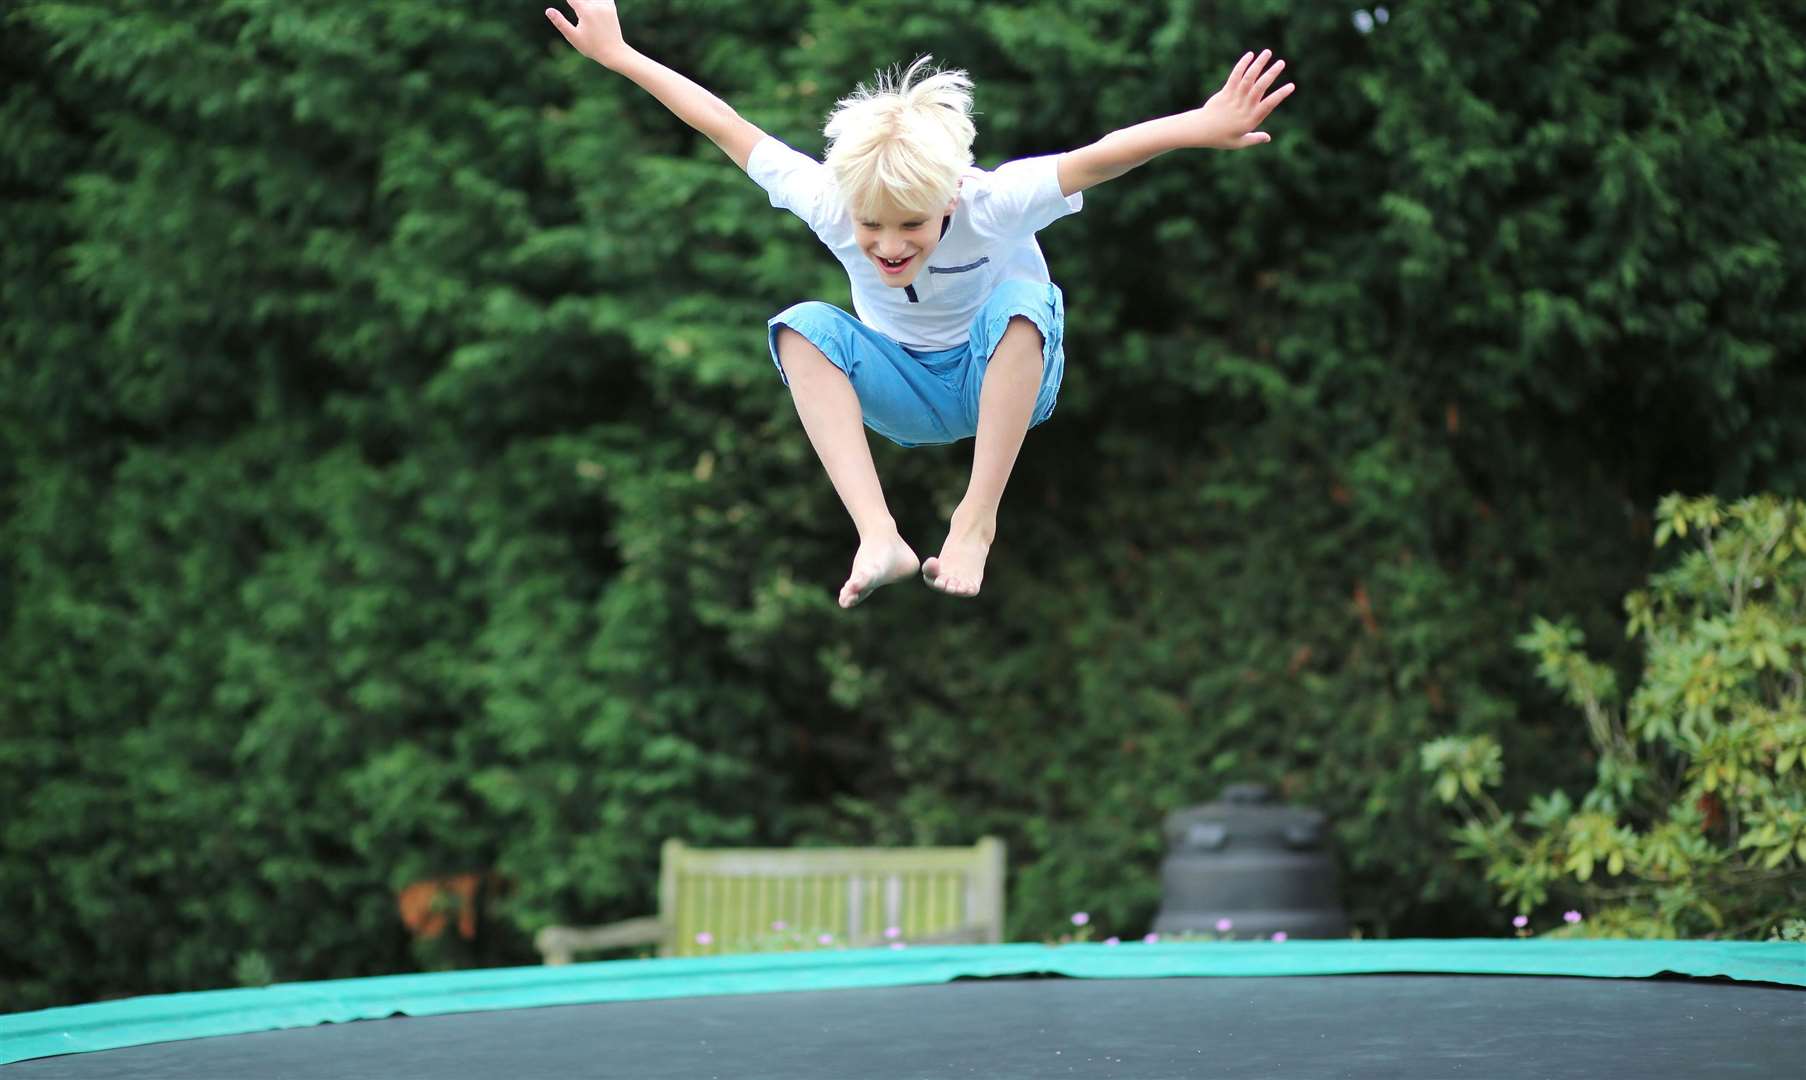 Has your child spent a lot of time on their trampoline?